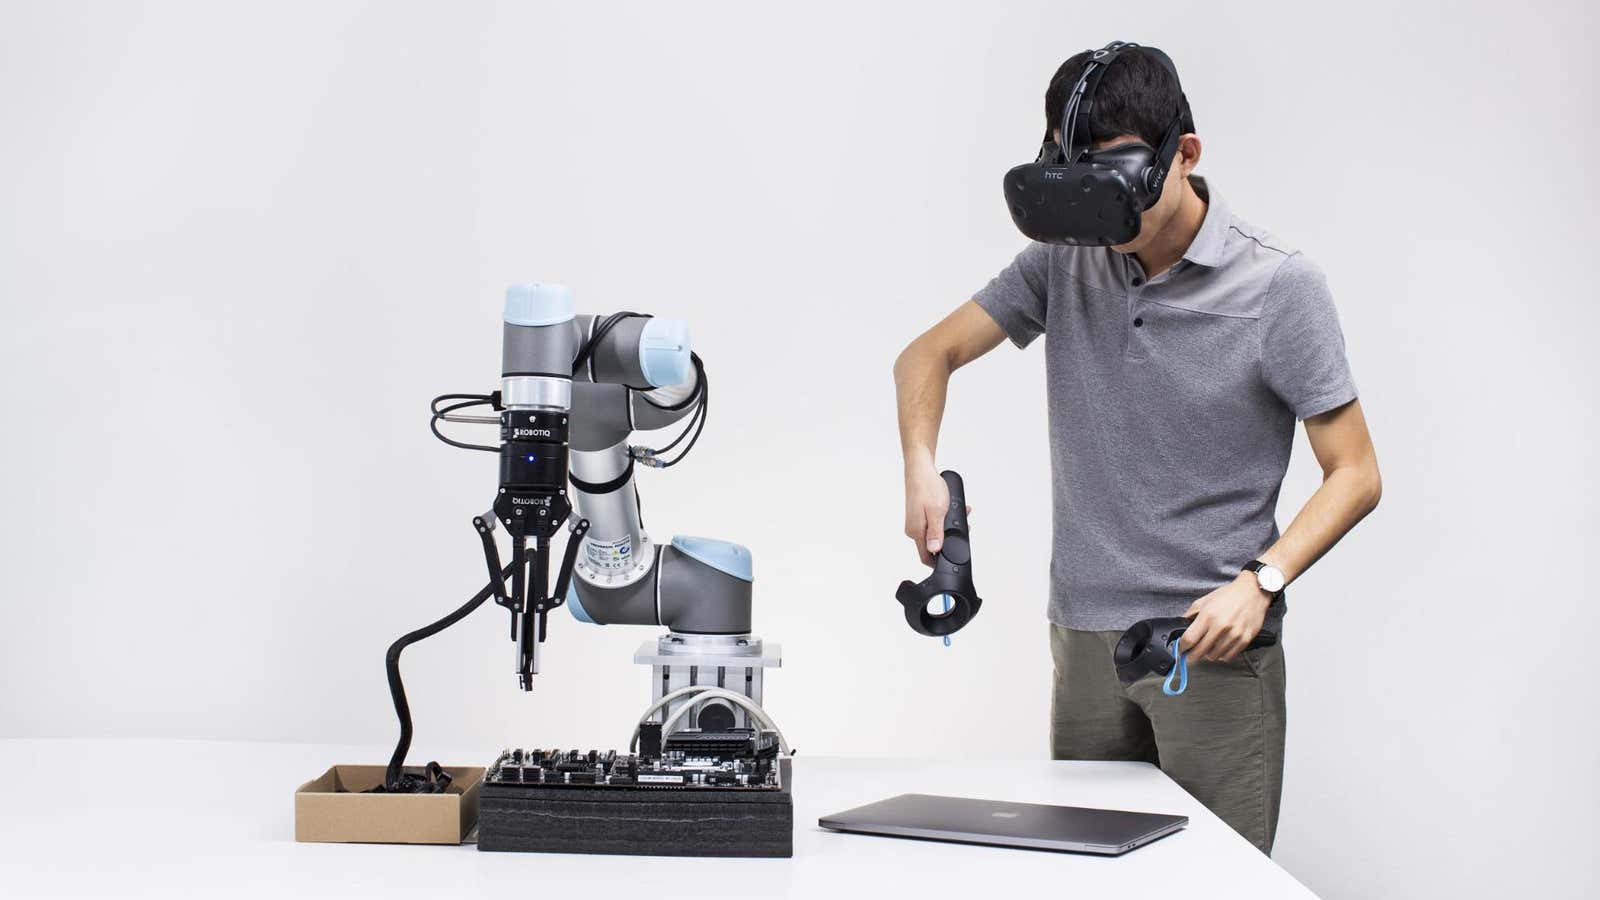 Cheap VR headsets could drive the next industrial robotic revolution